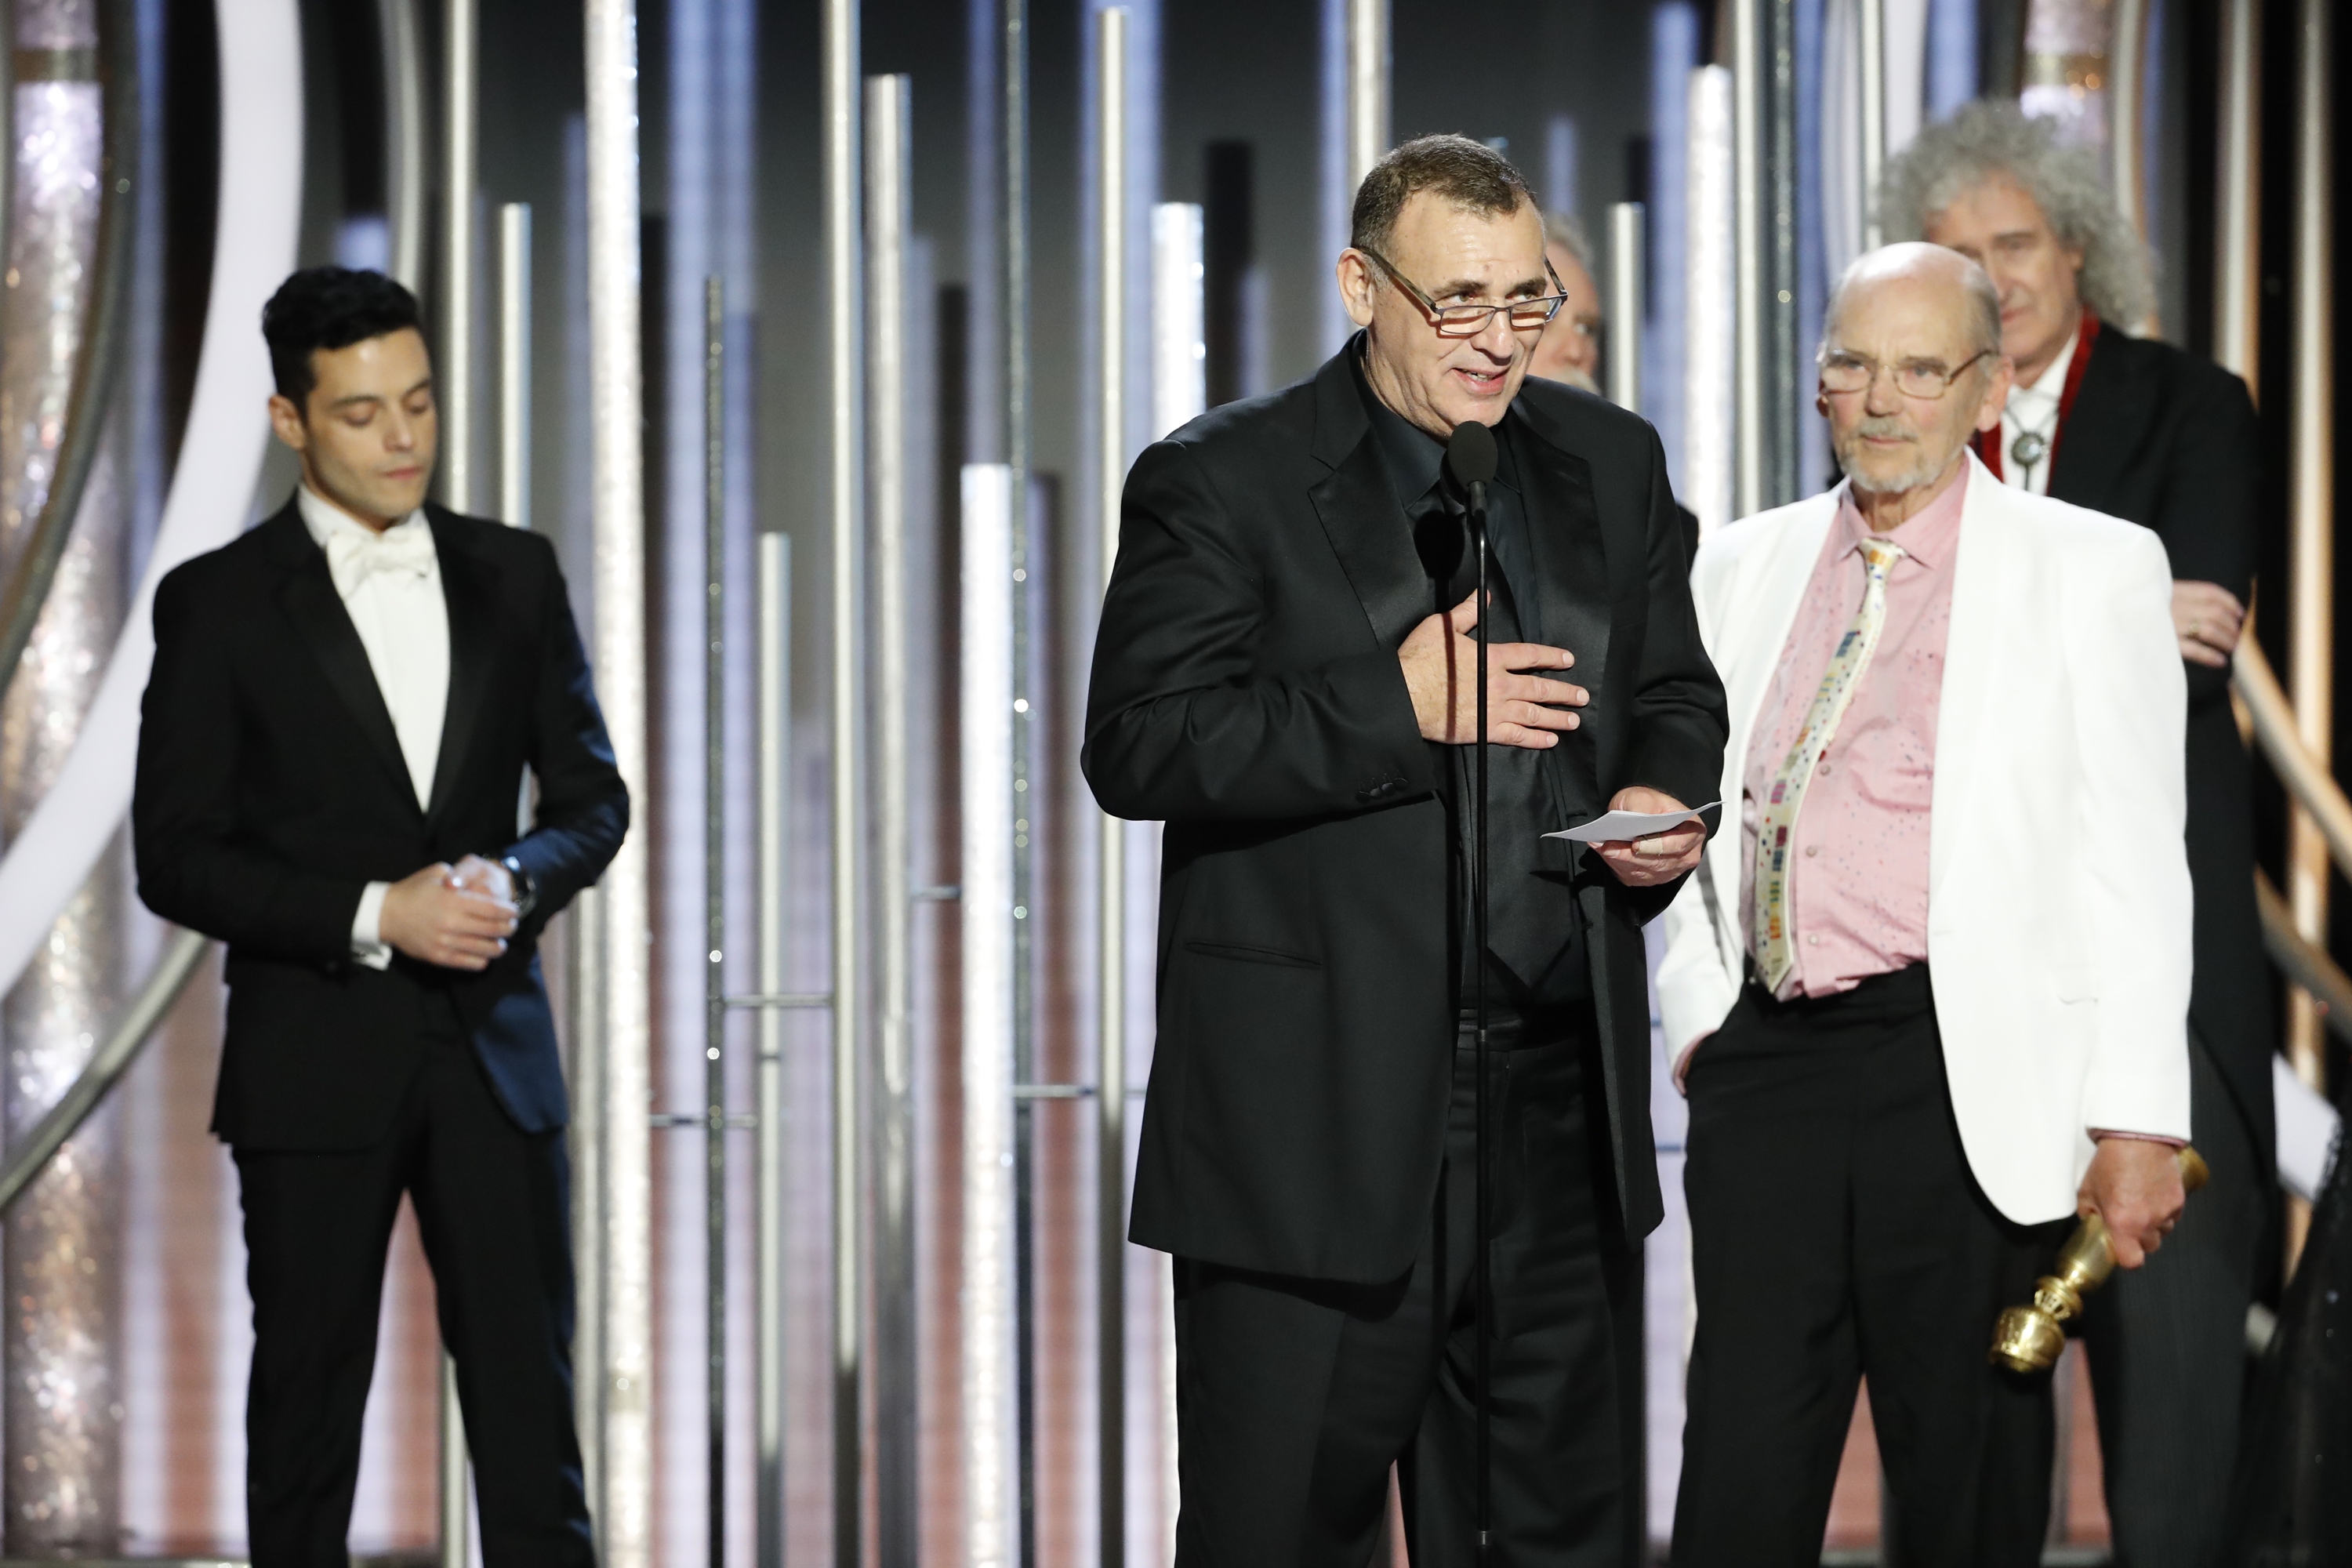 Jim Beach accepts the Best Motion Picture – Drama award for “Bohemian Rhapsody” onstage during the 76th Annual Golden Globe Awards. (NBCUniversal/Getty Images)